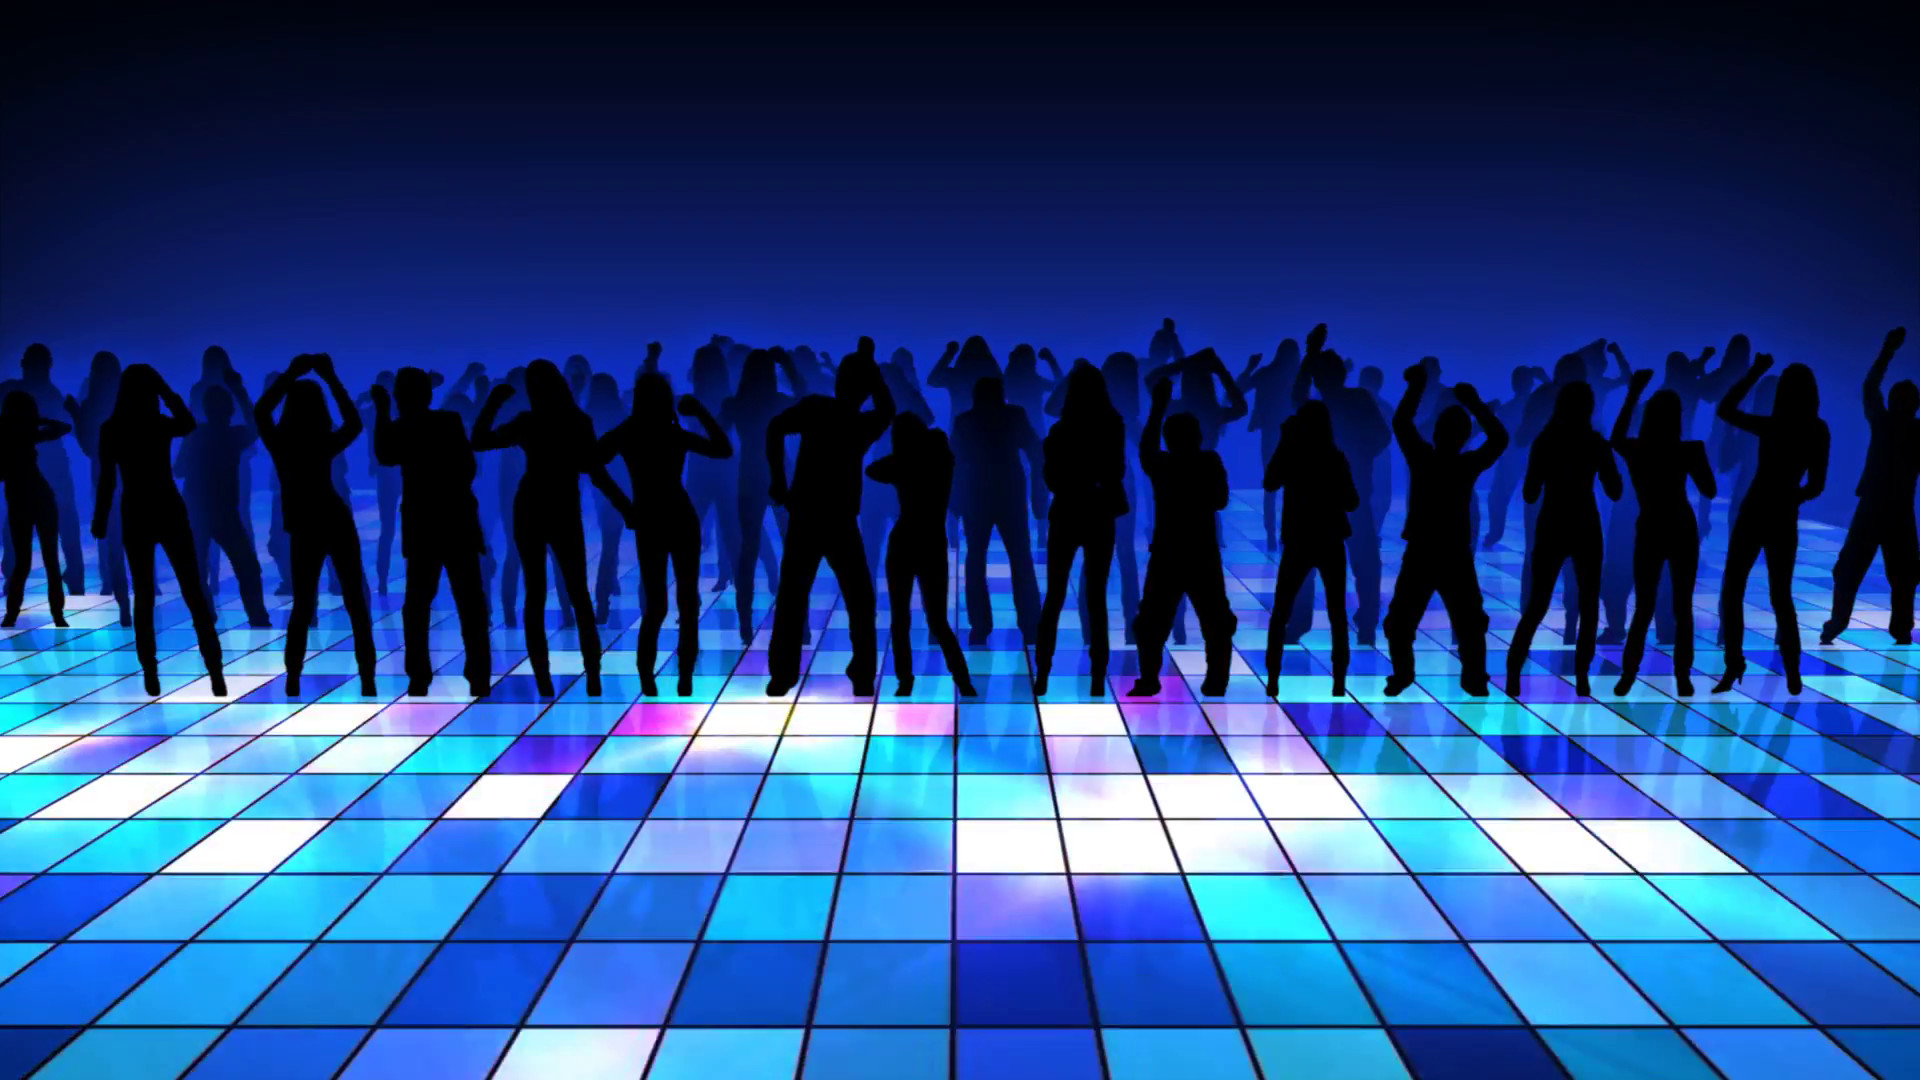 1920x1080 Dancing people dark silhouettes with lights on the background. Motion  Background - VideoBlocks